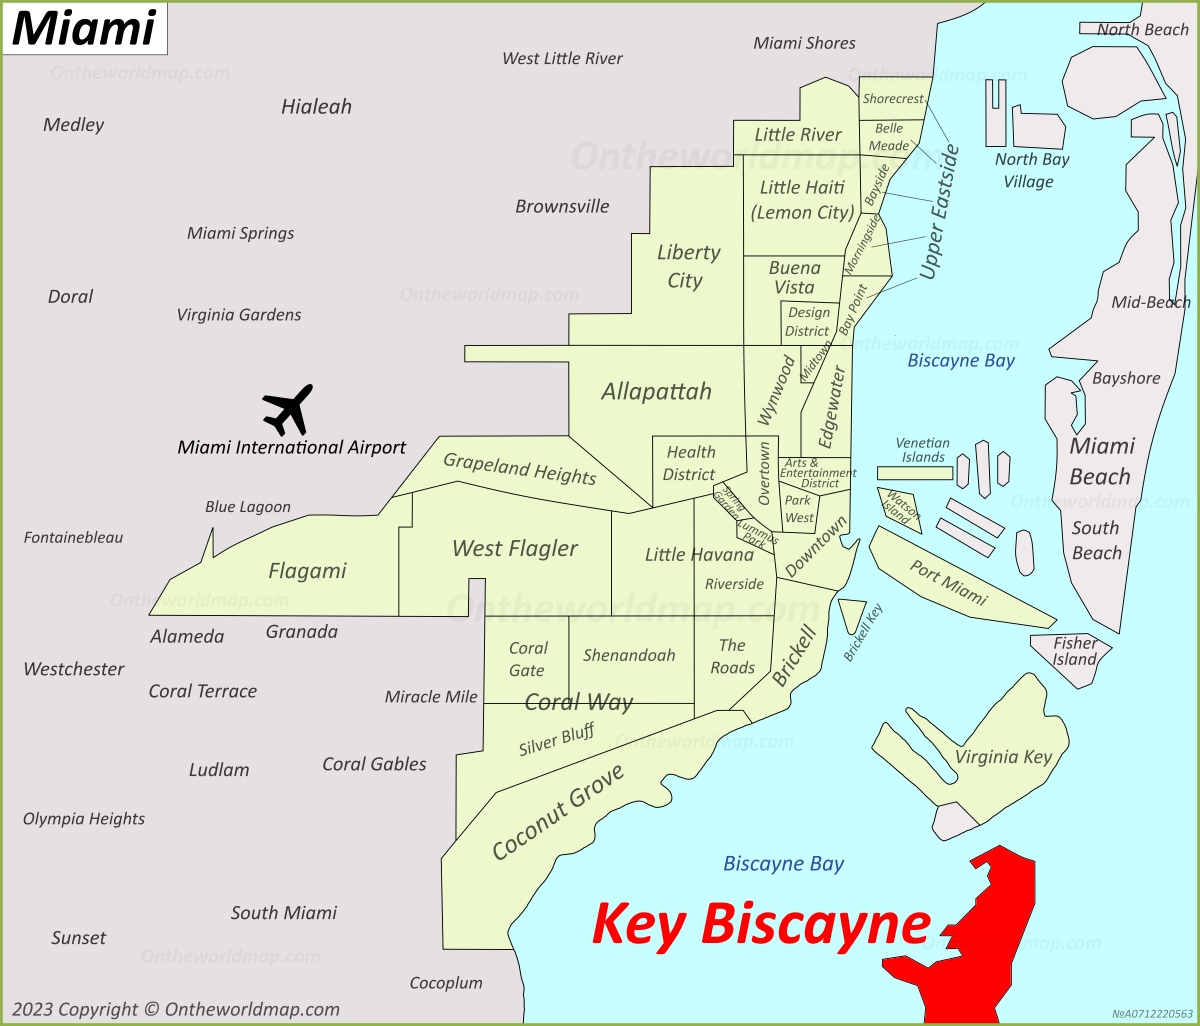 Key Biscayne Location On The Miami Map